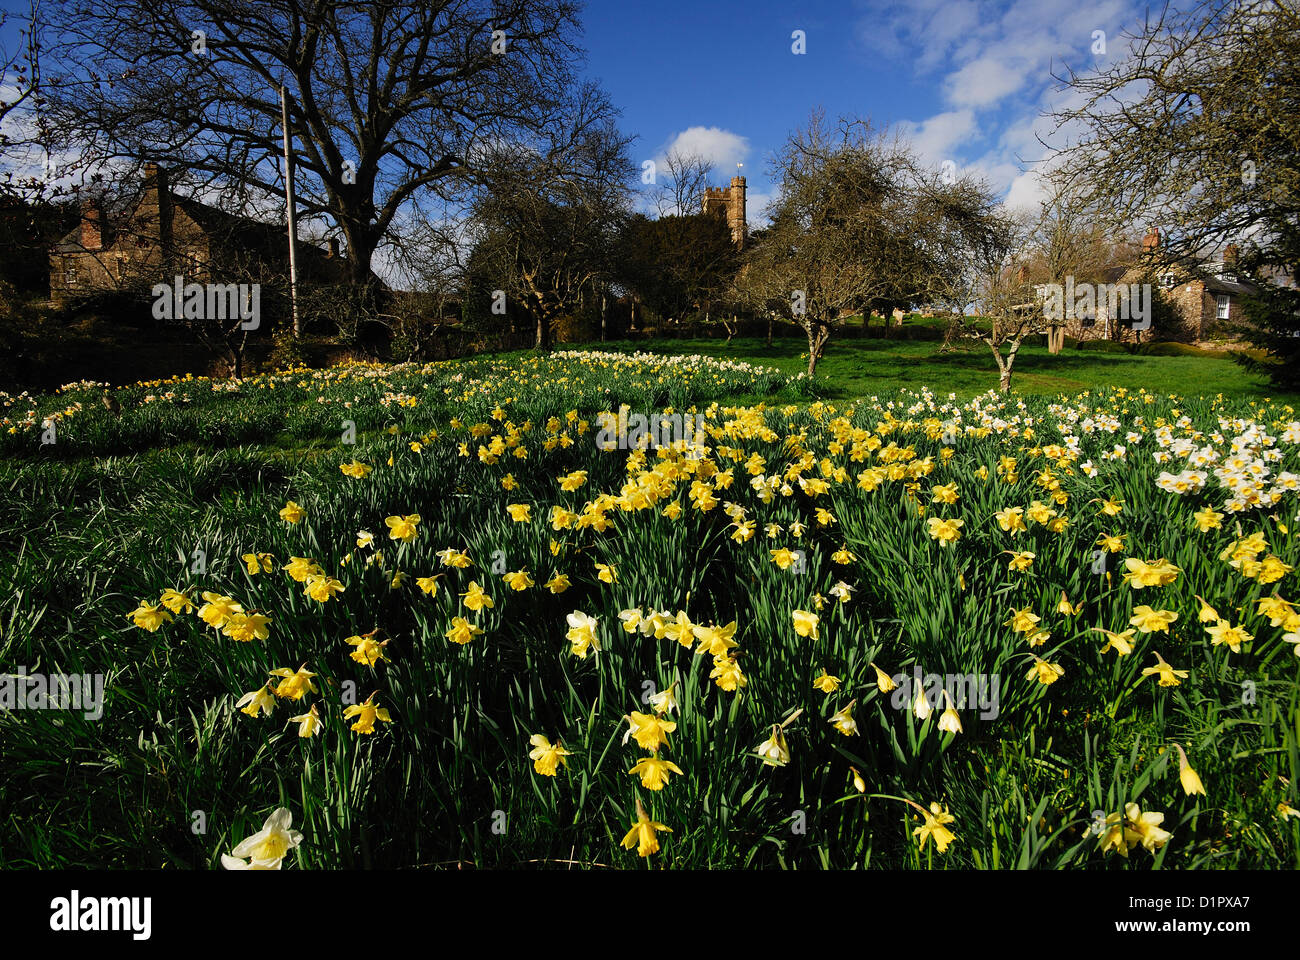 A village scene with daffodils in the foreground UK Stock Photo